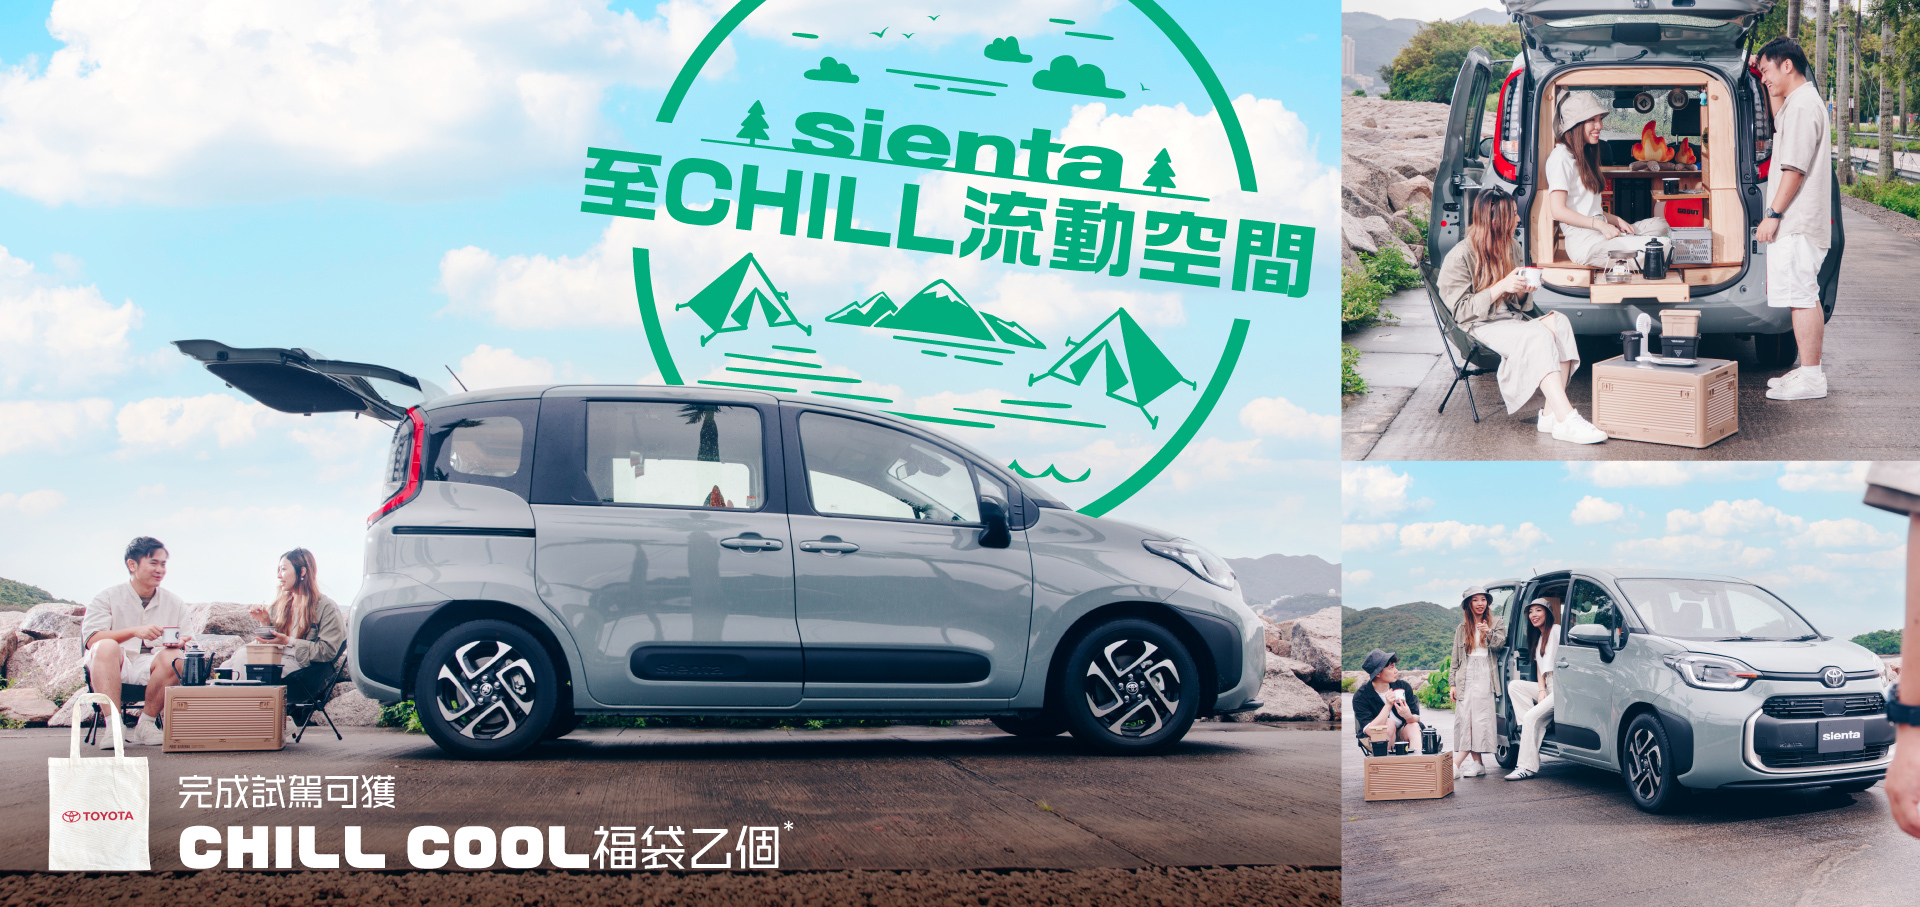 SIENTA Ultimate Chill Mobile Space